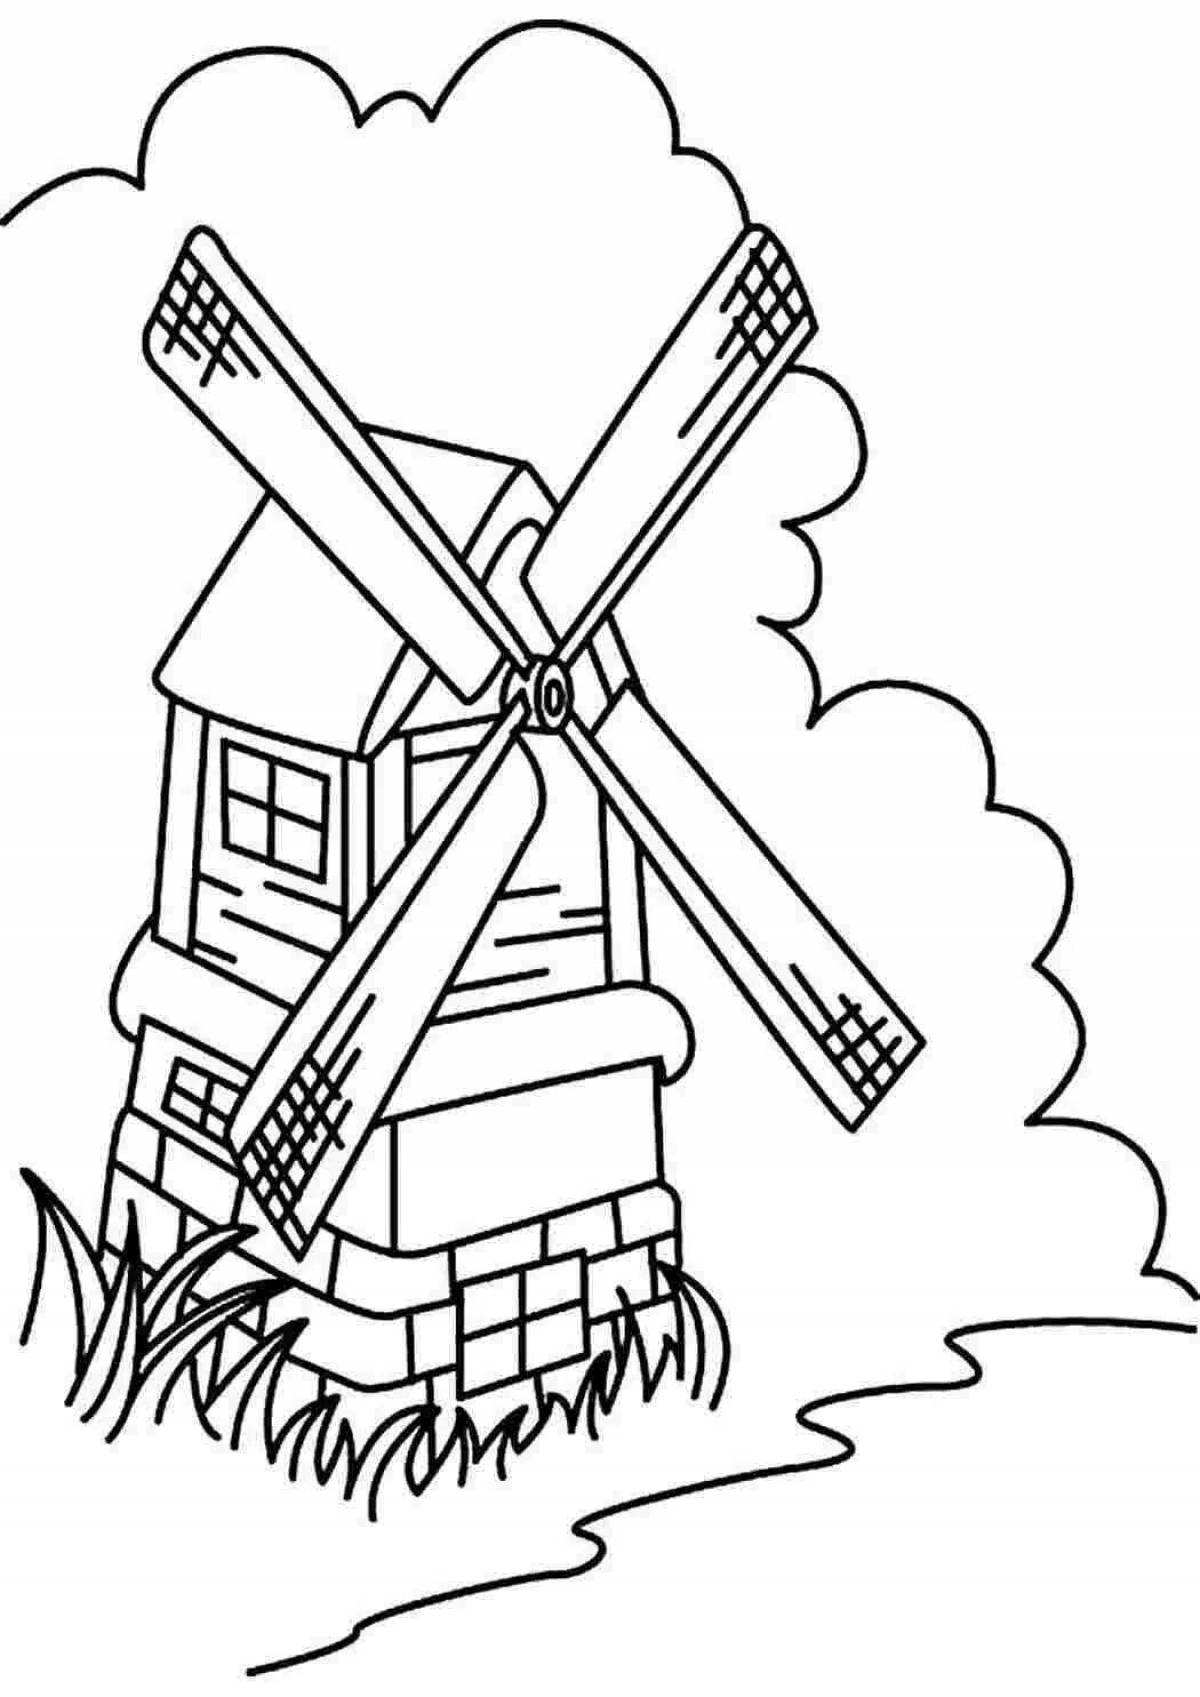 Living windmill coloring pages for kids